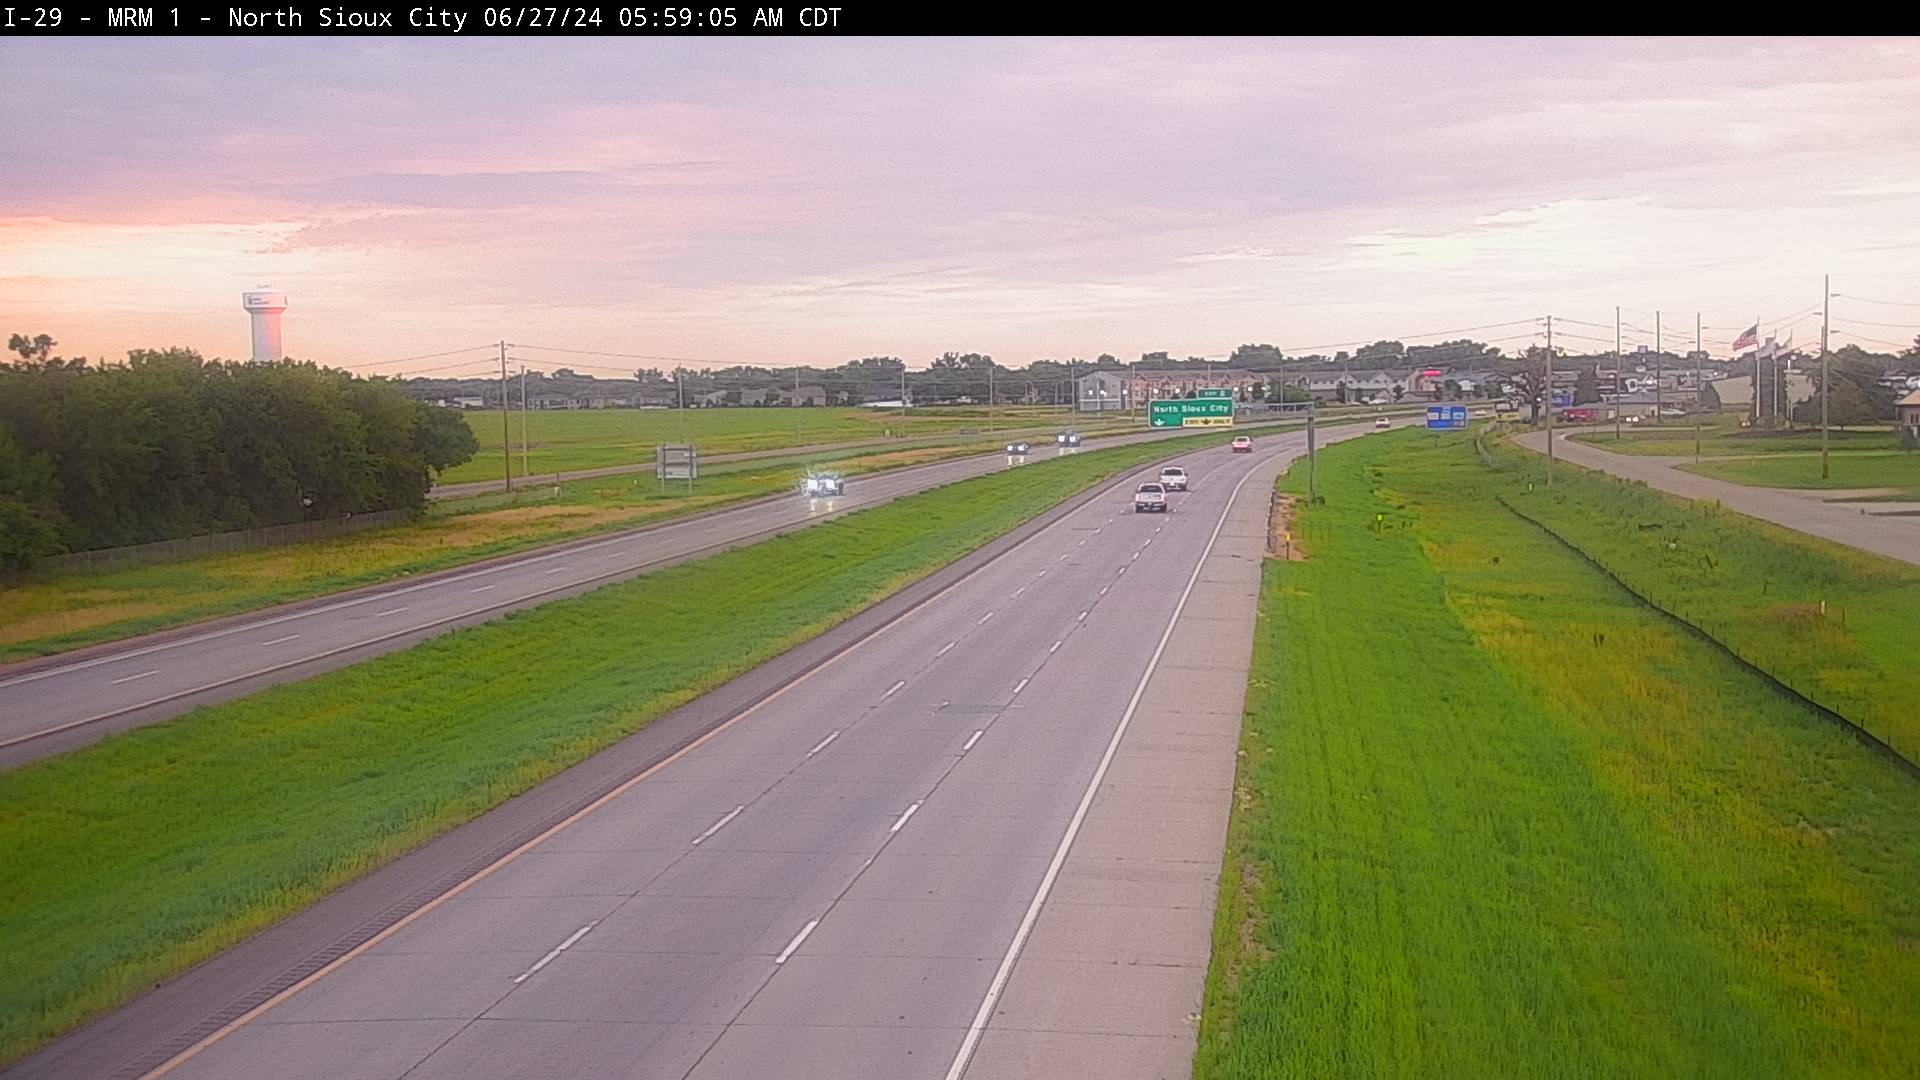 Traffic Cam 2 miles north of town along I-29 @ MP 2 - North Player